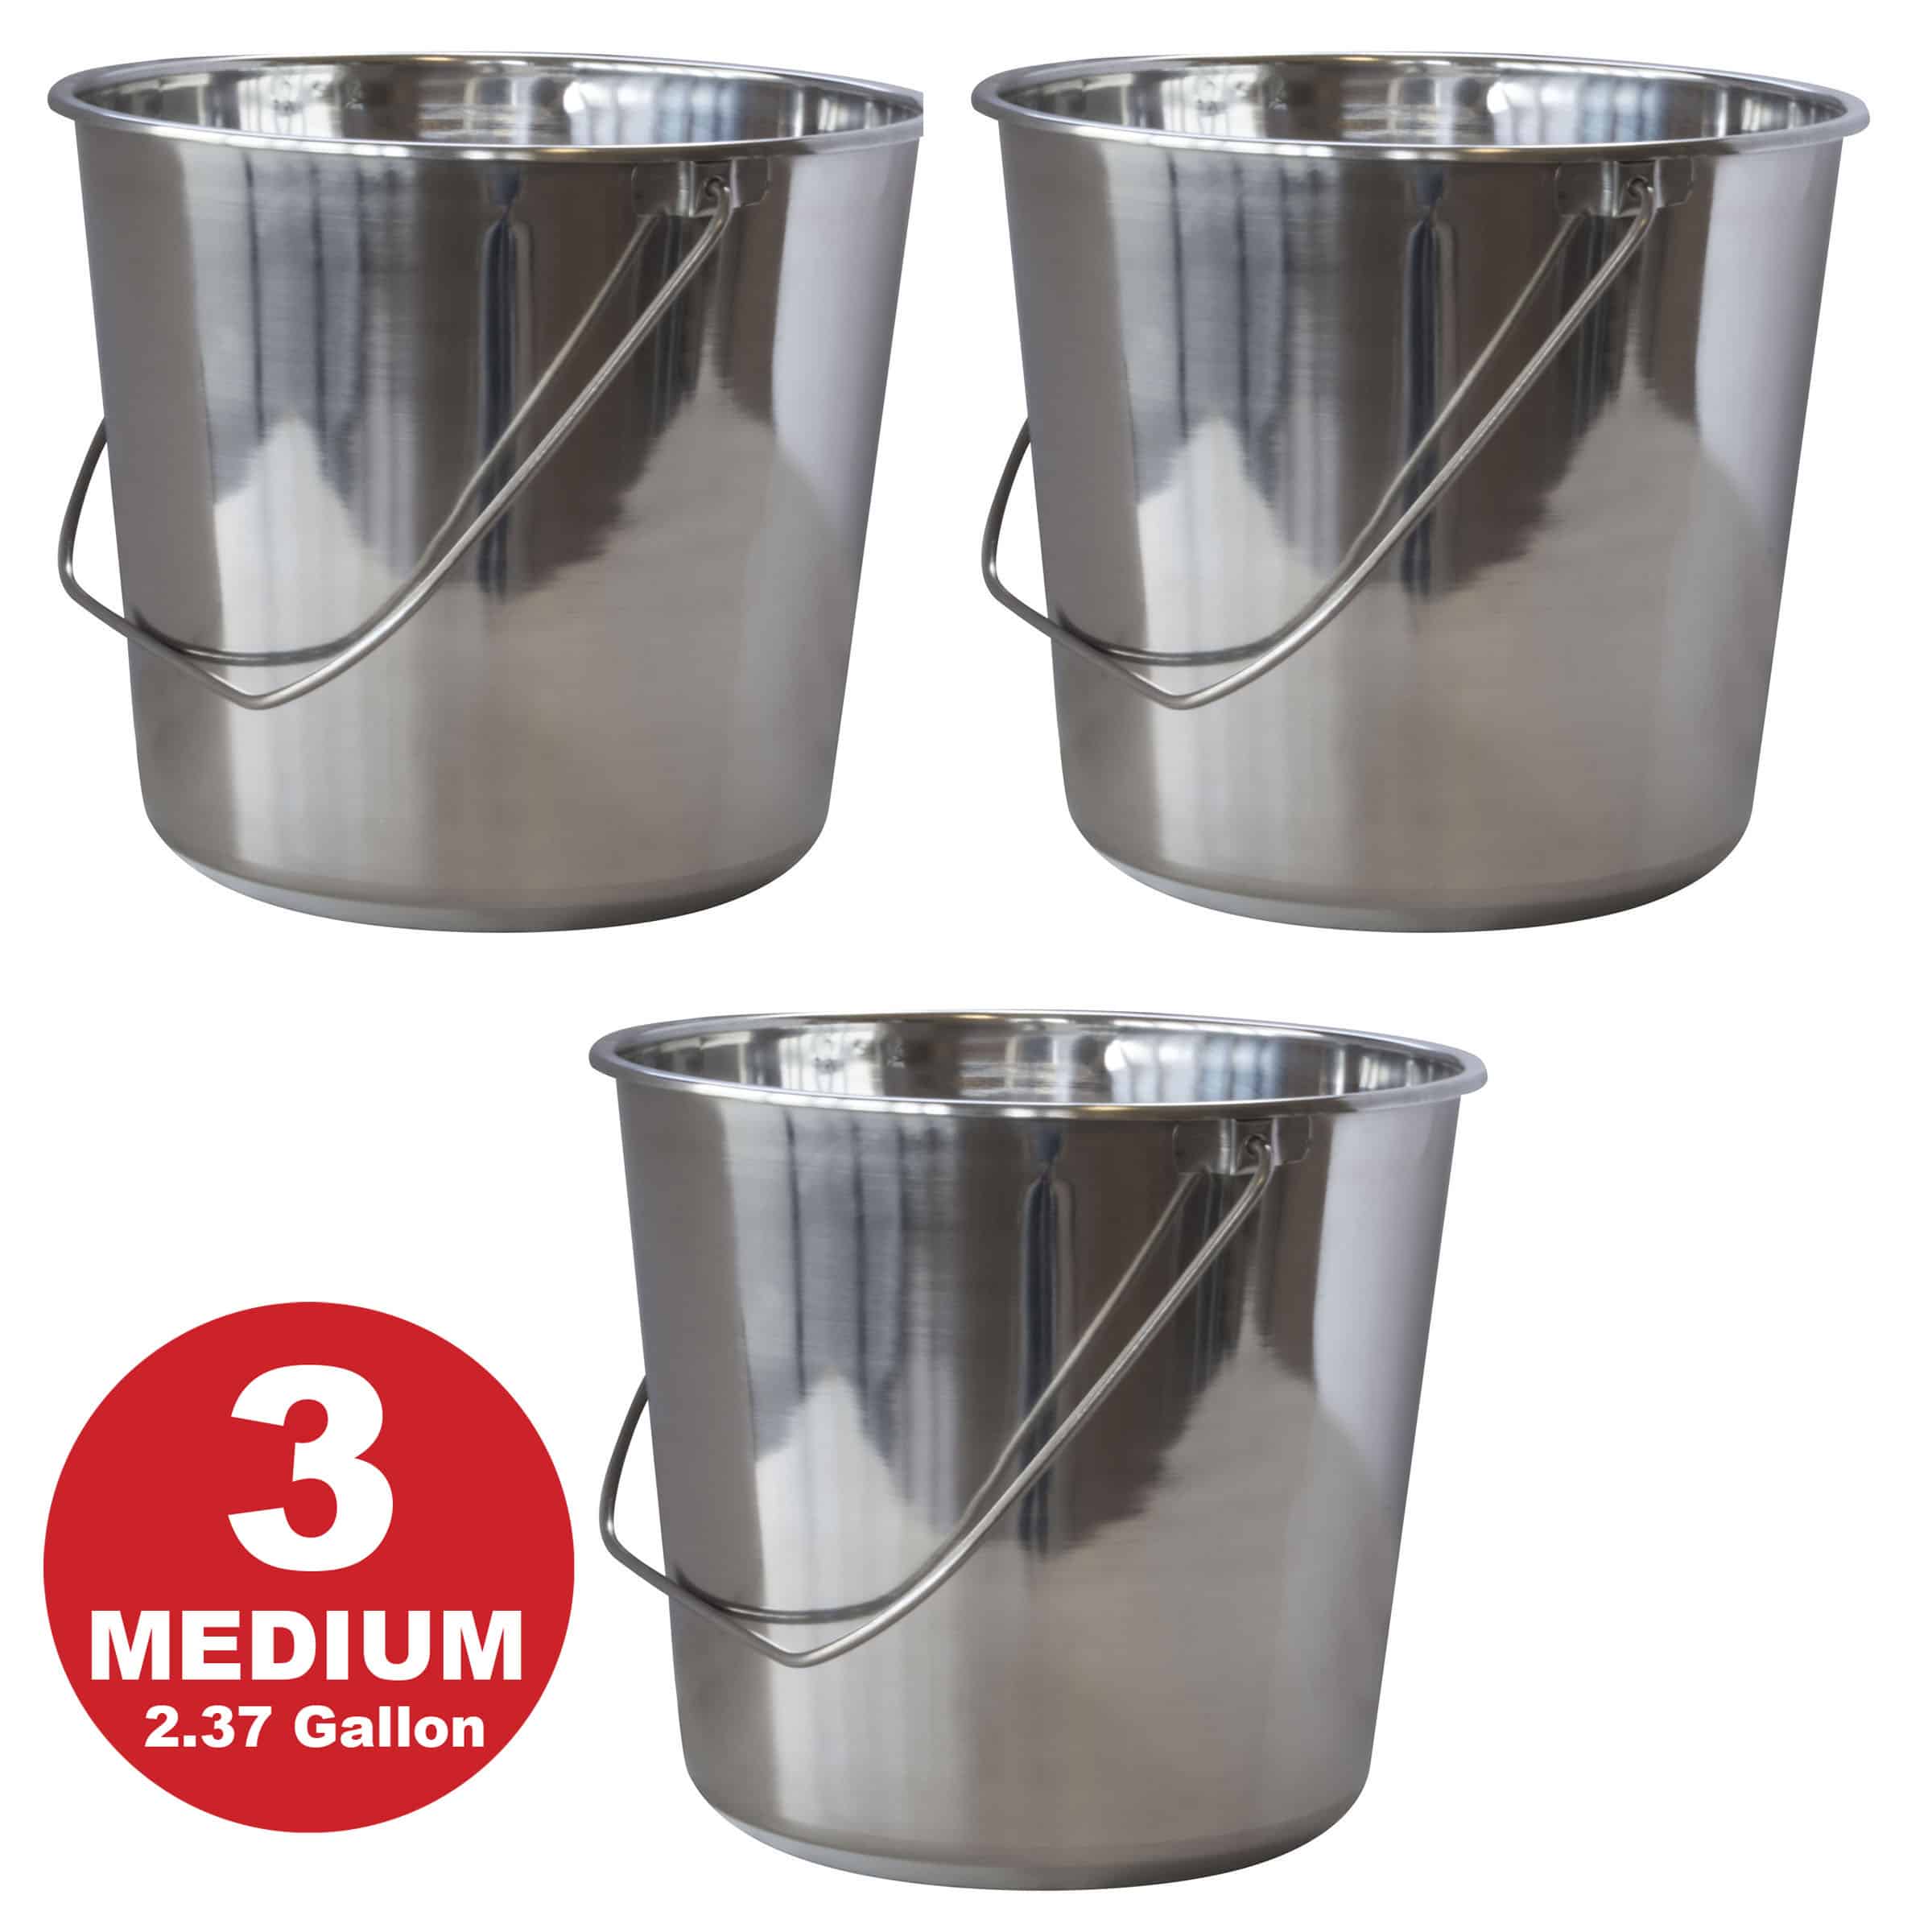 Amerihome 8-Piece Stainless Steel Stock Pot Set, Silver